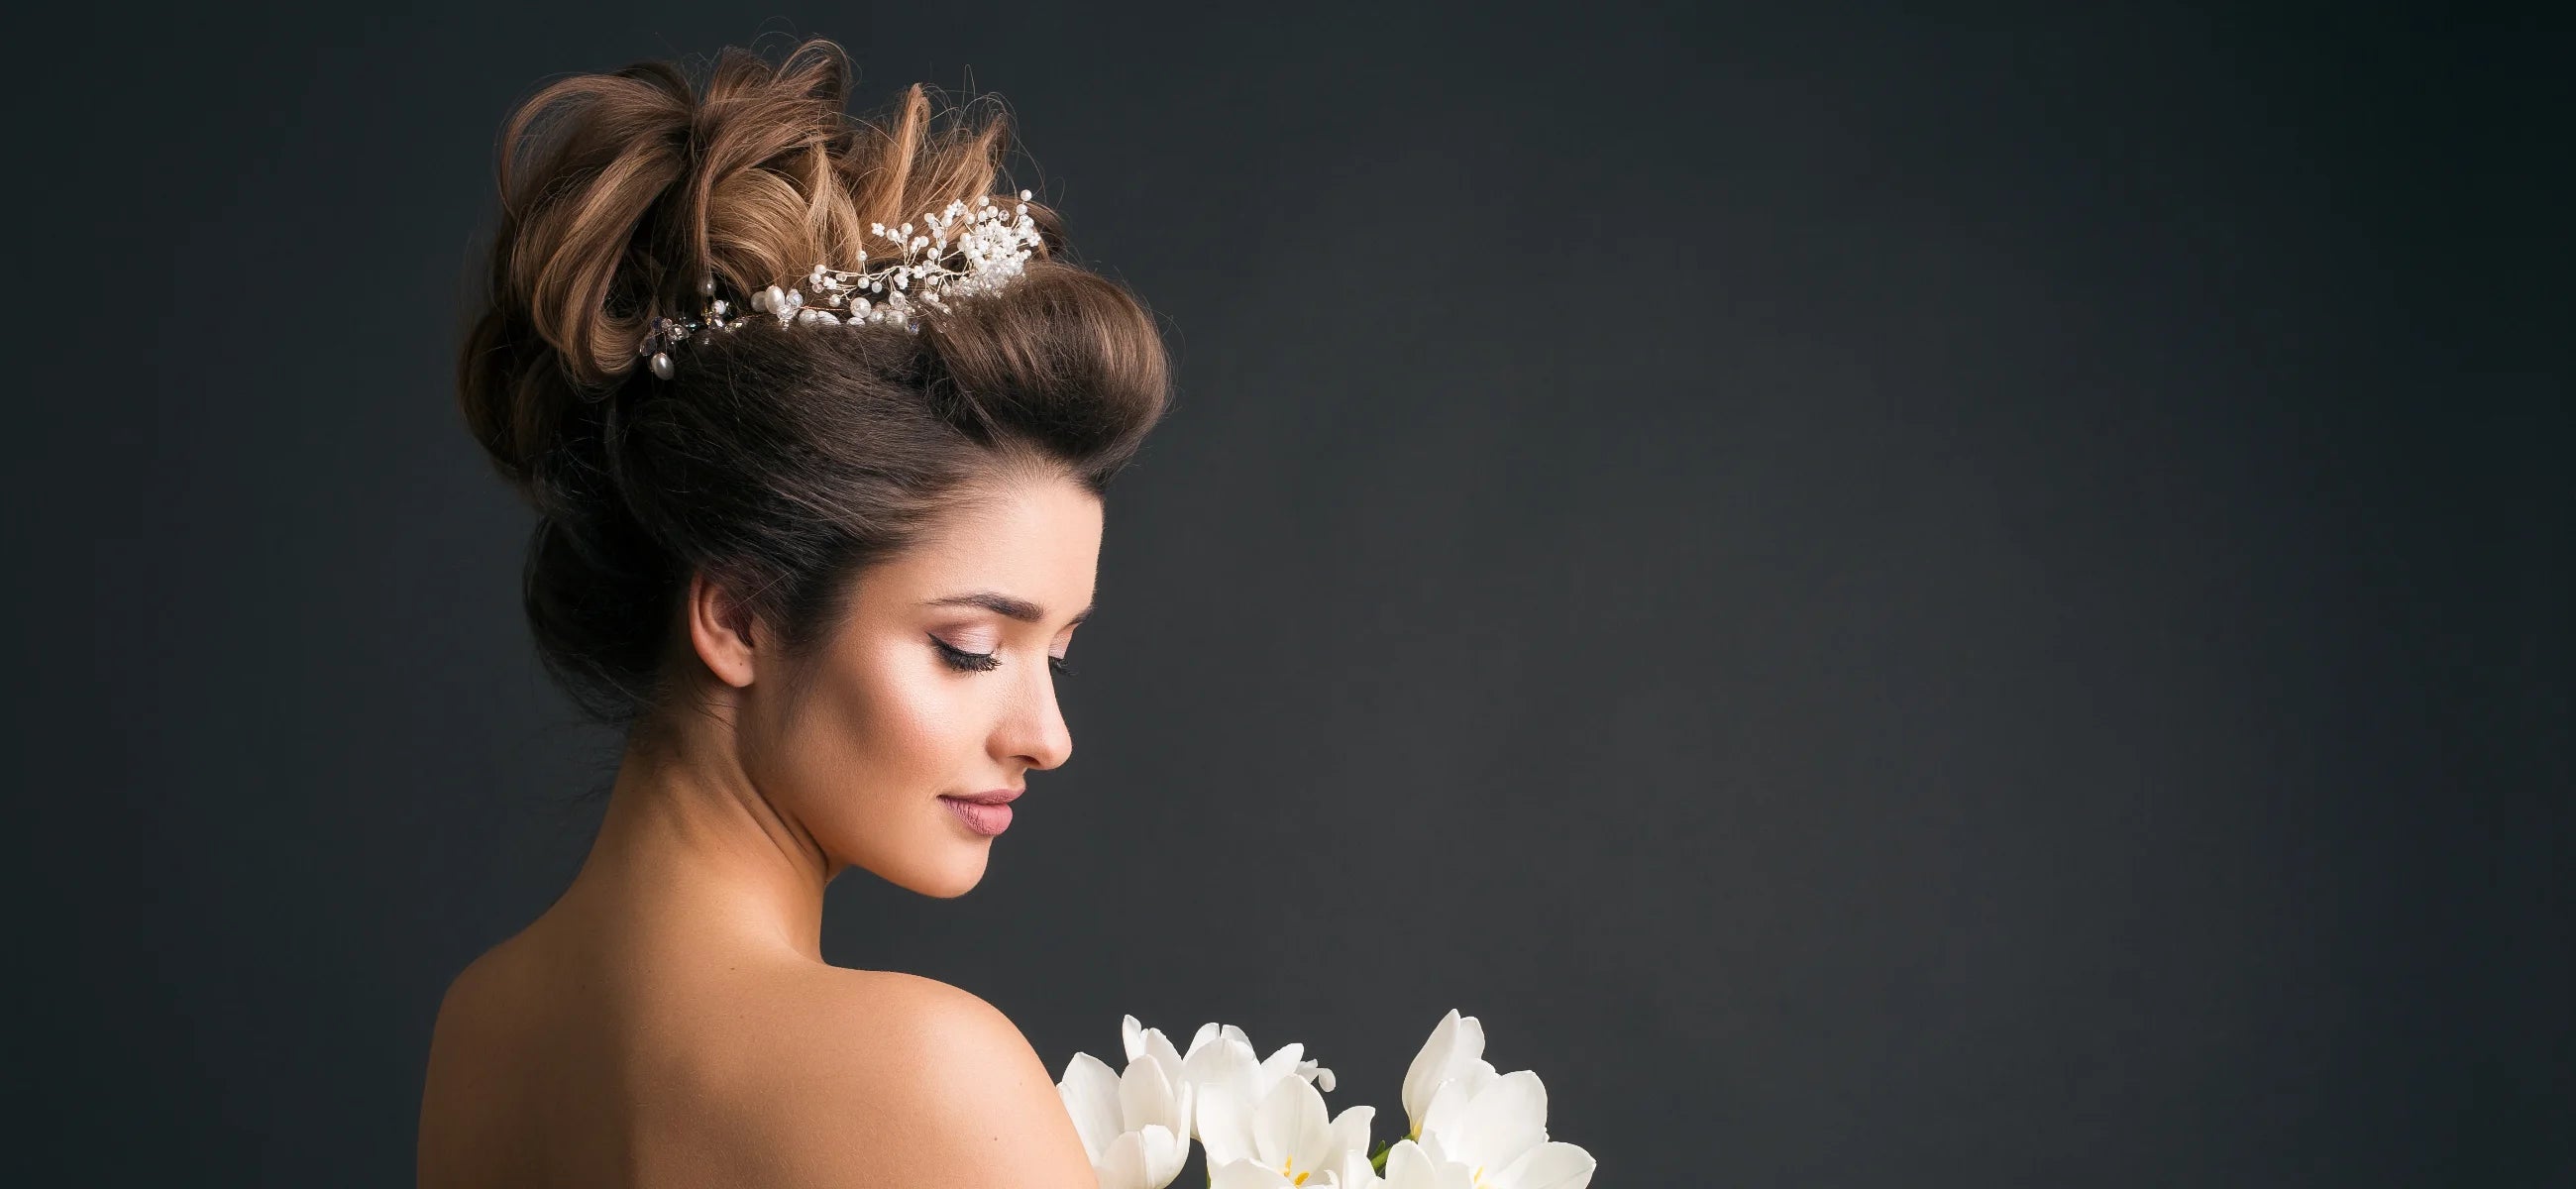 These are the most beautiful wedding hairstyles for every hair length